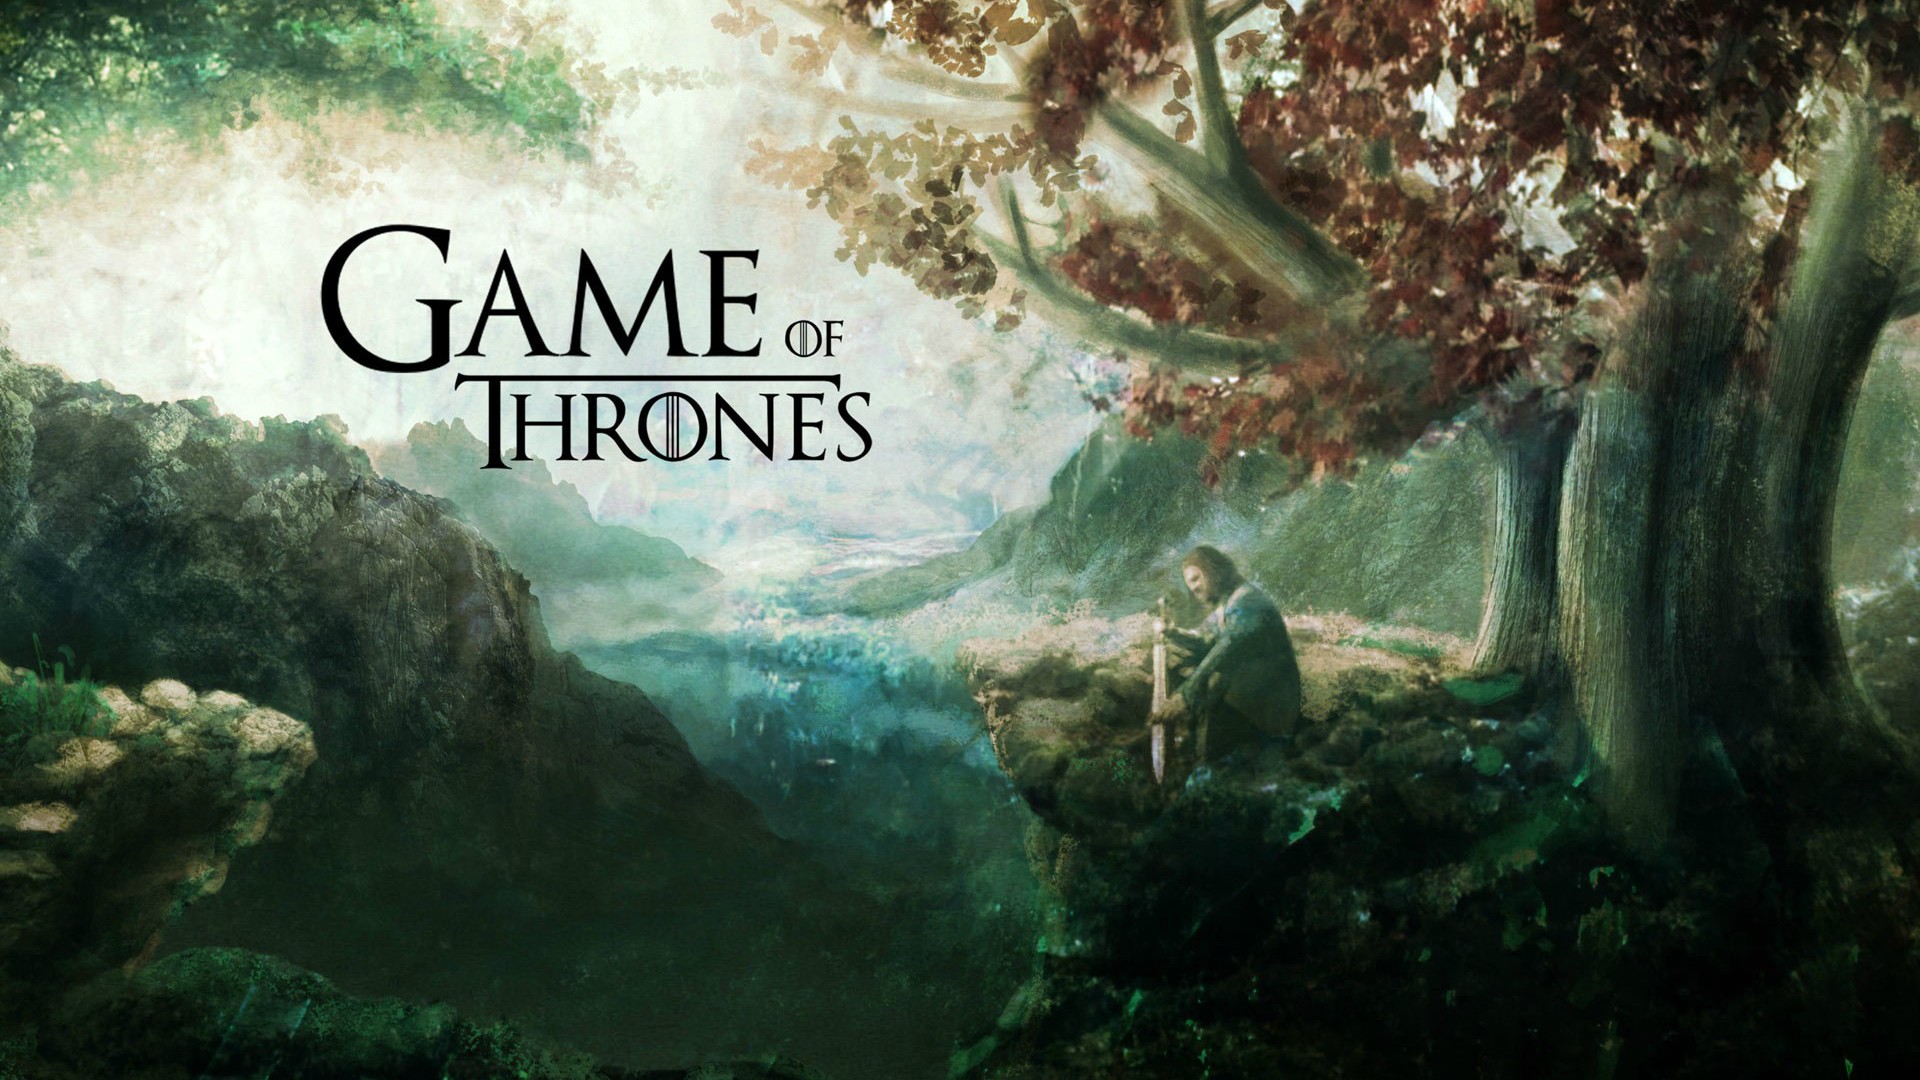 Game Of Thrones, Ned Stark, Winterfell Wallpapers HD / Desktop and